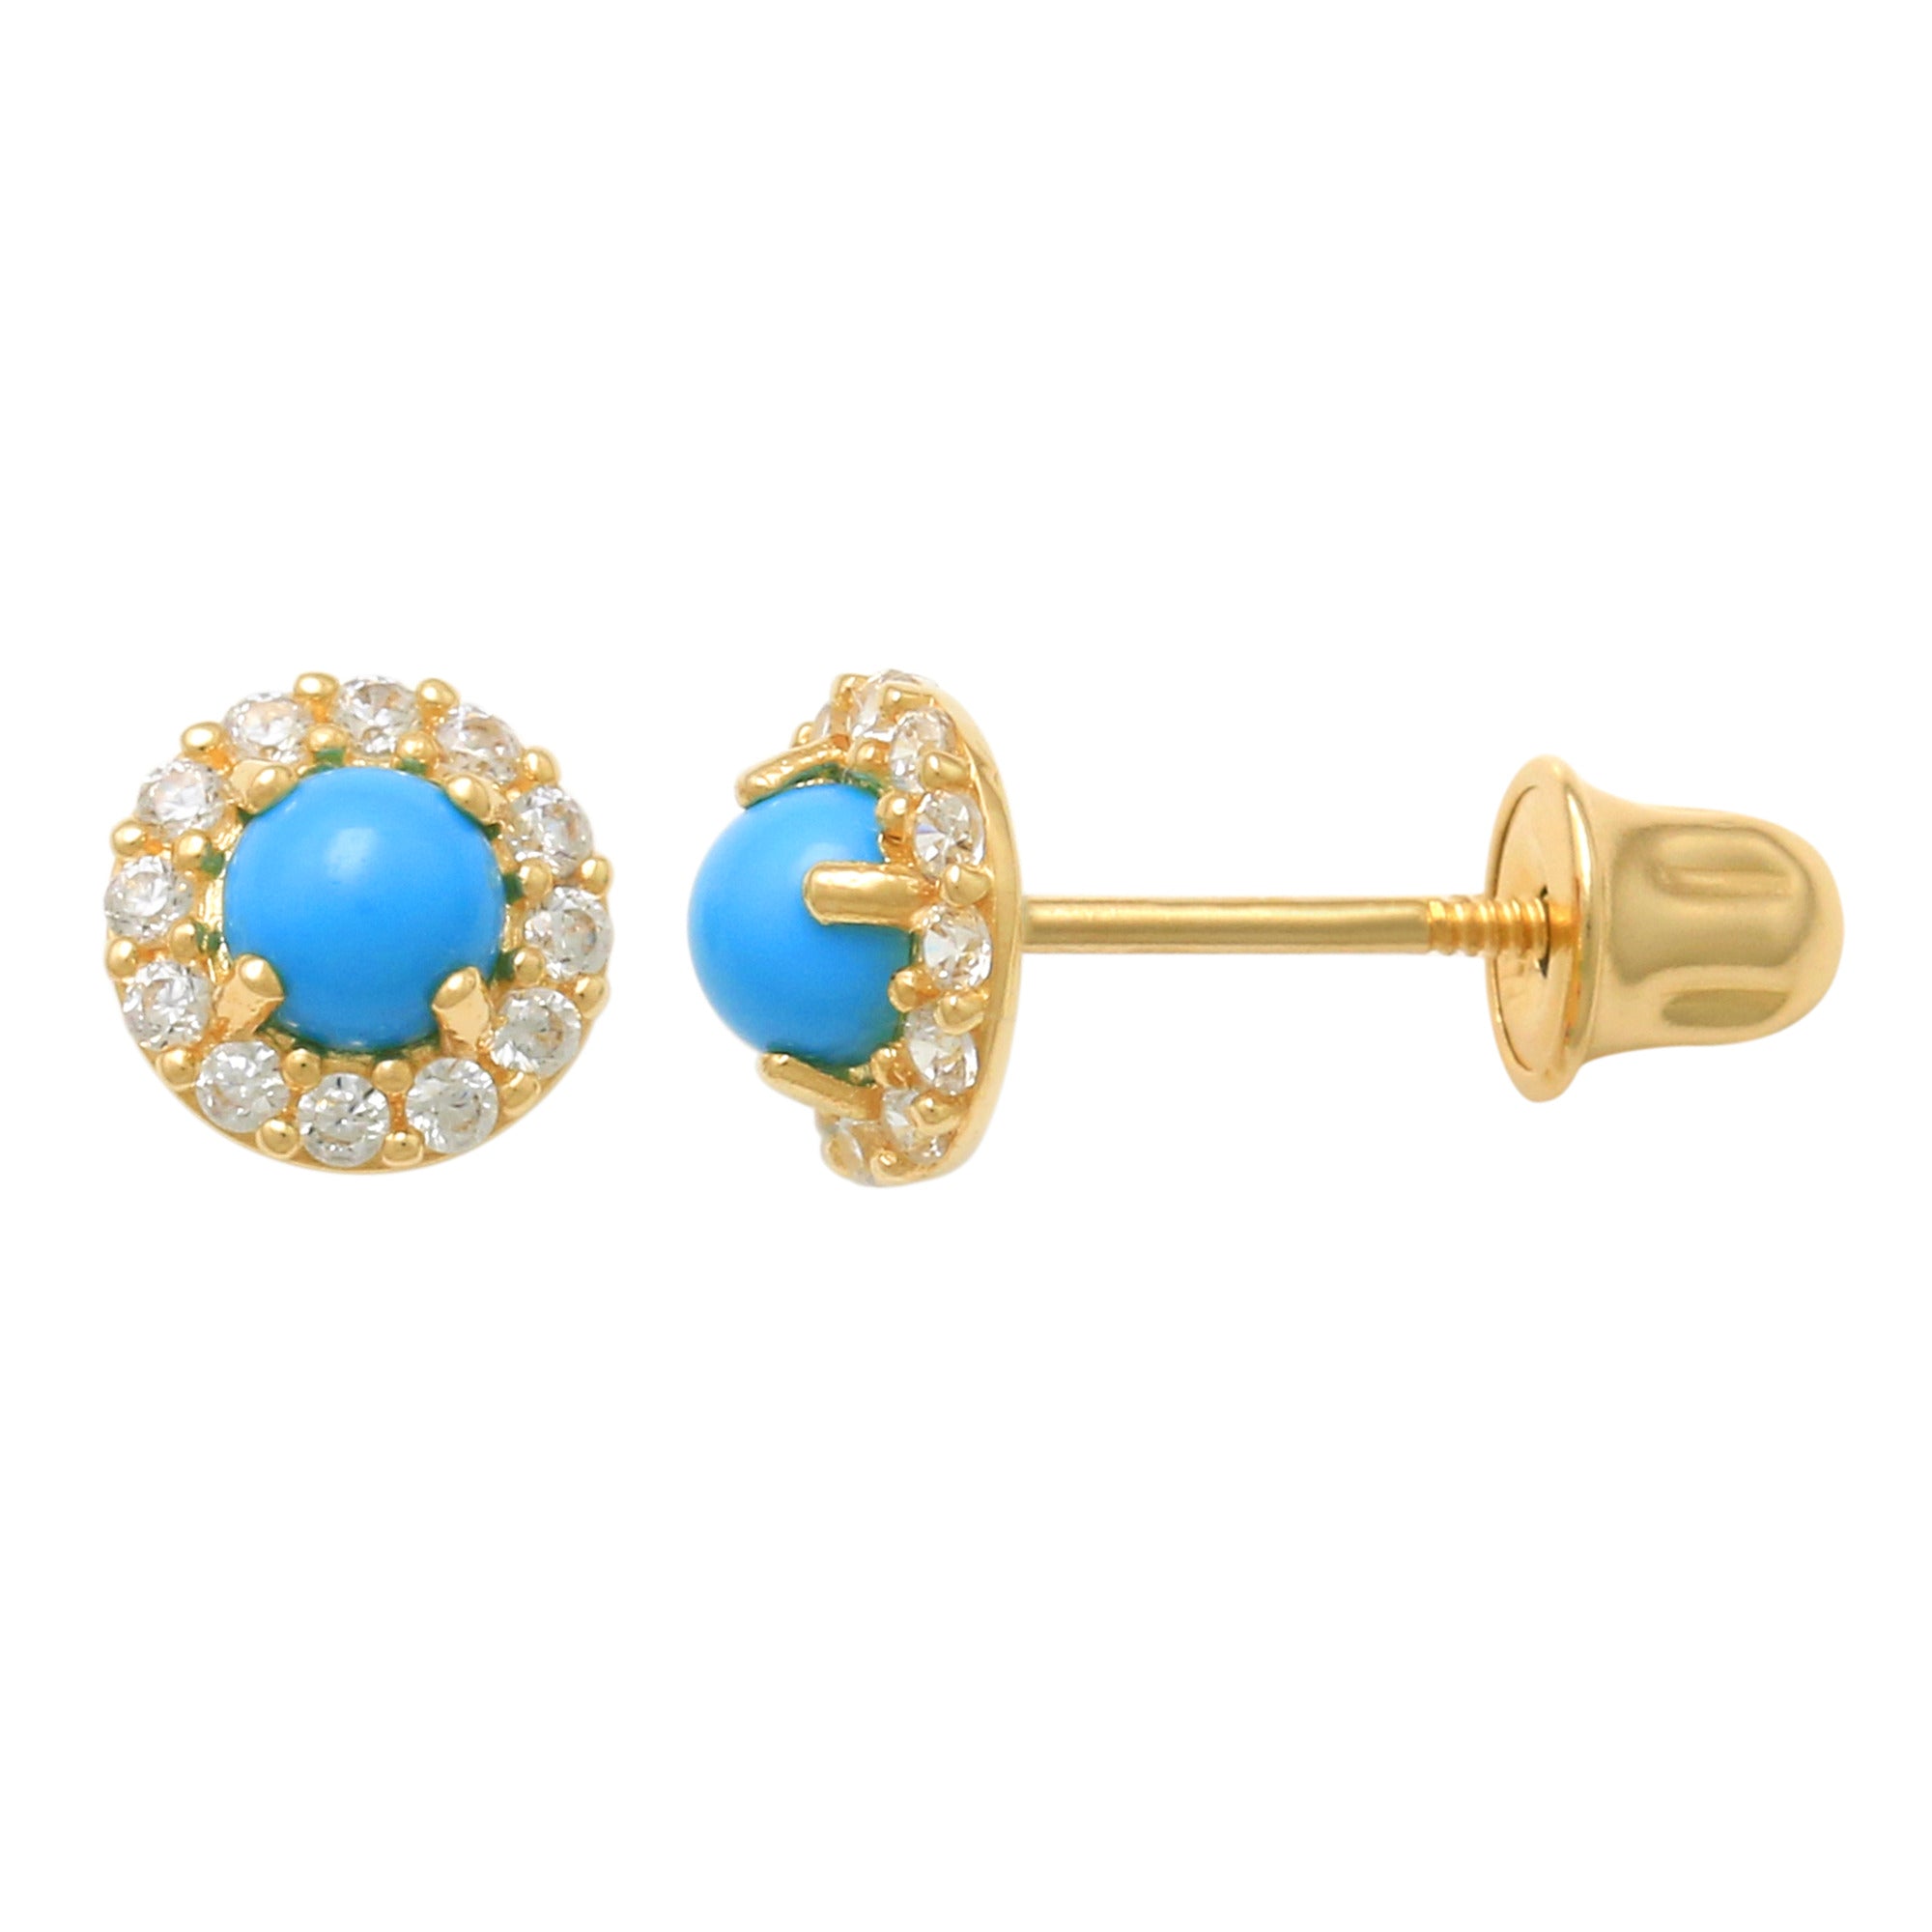 Turquoise CZ Round Sparkling Baby Earrings